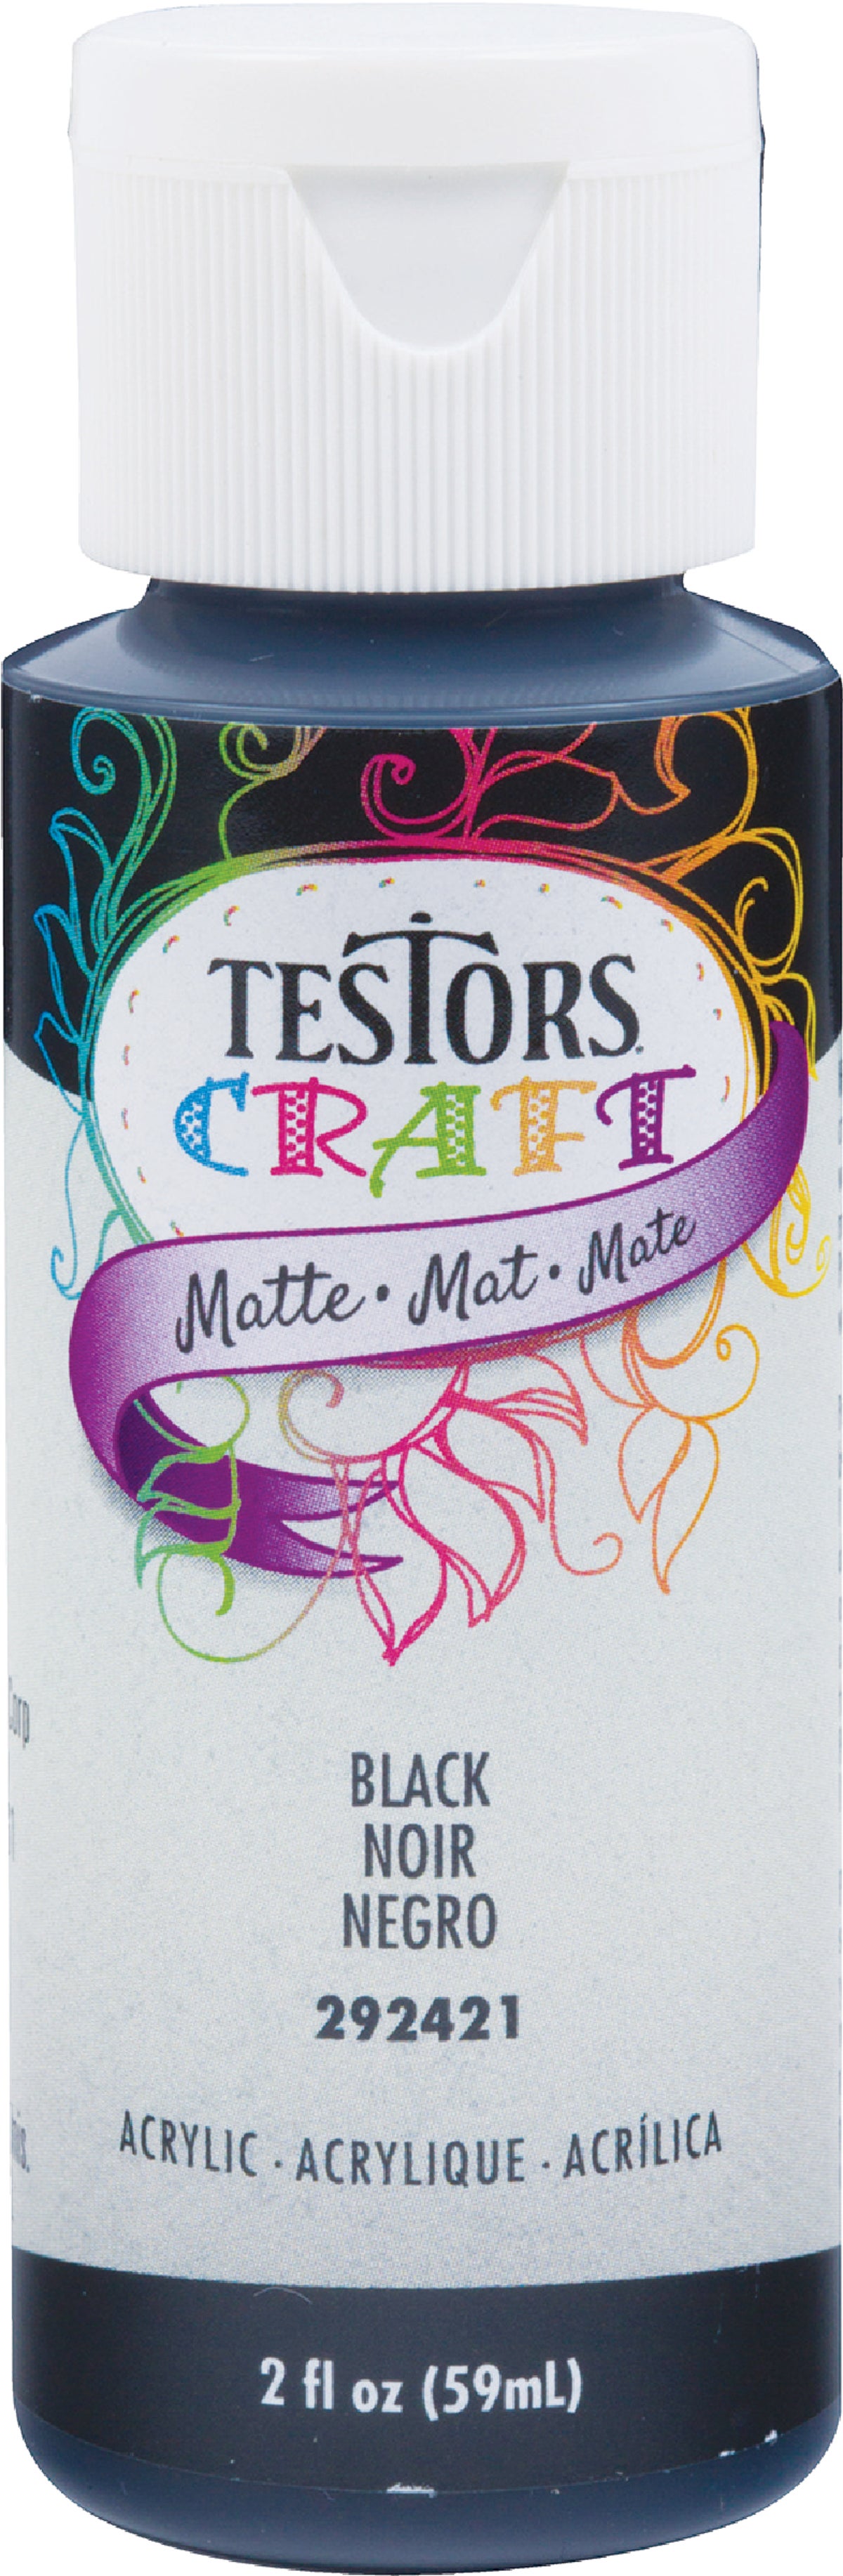 Testors Craft Matte Orange Acrylic Paint in the Craft Paint department at